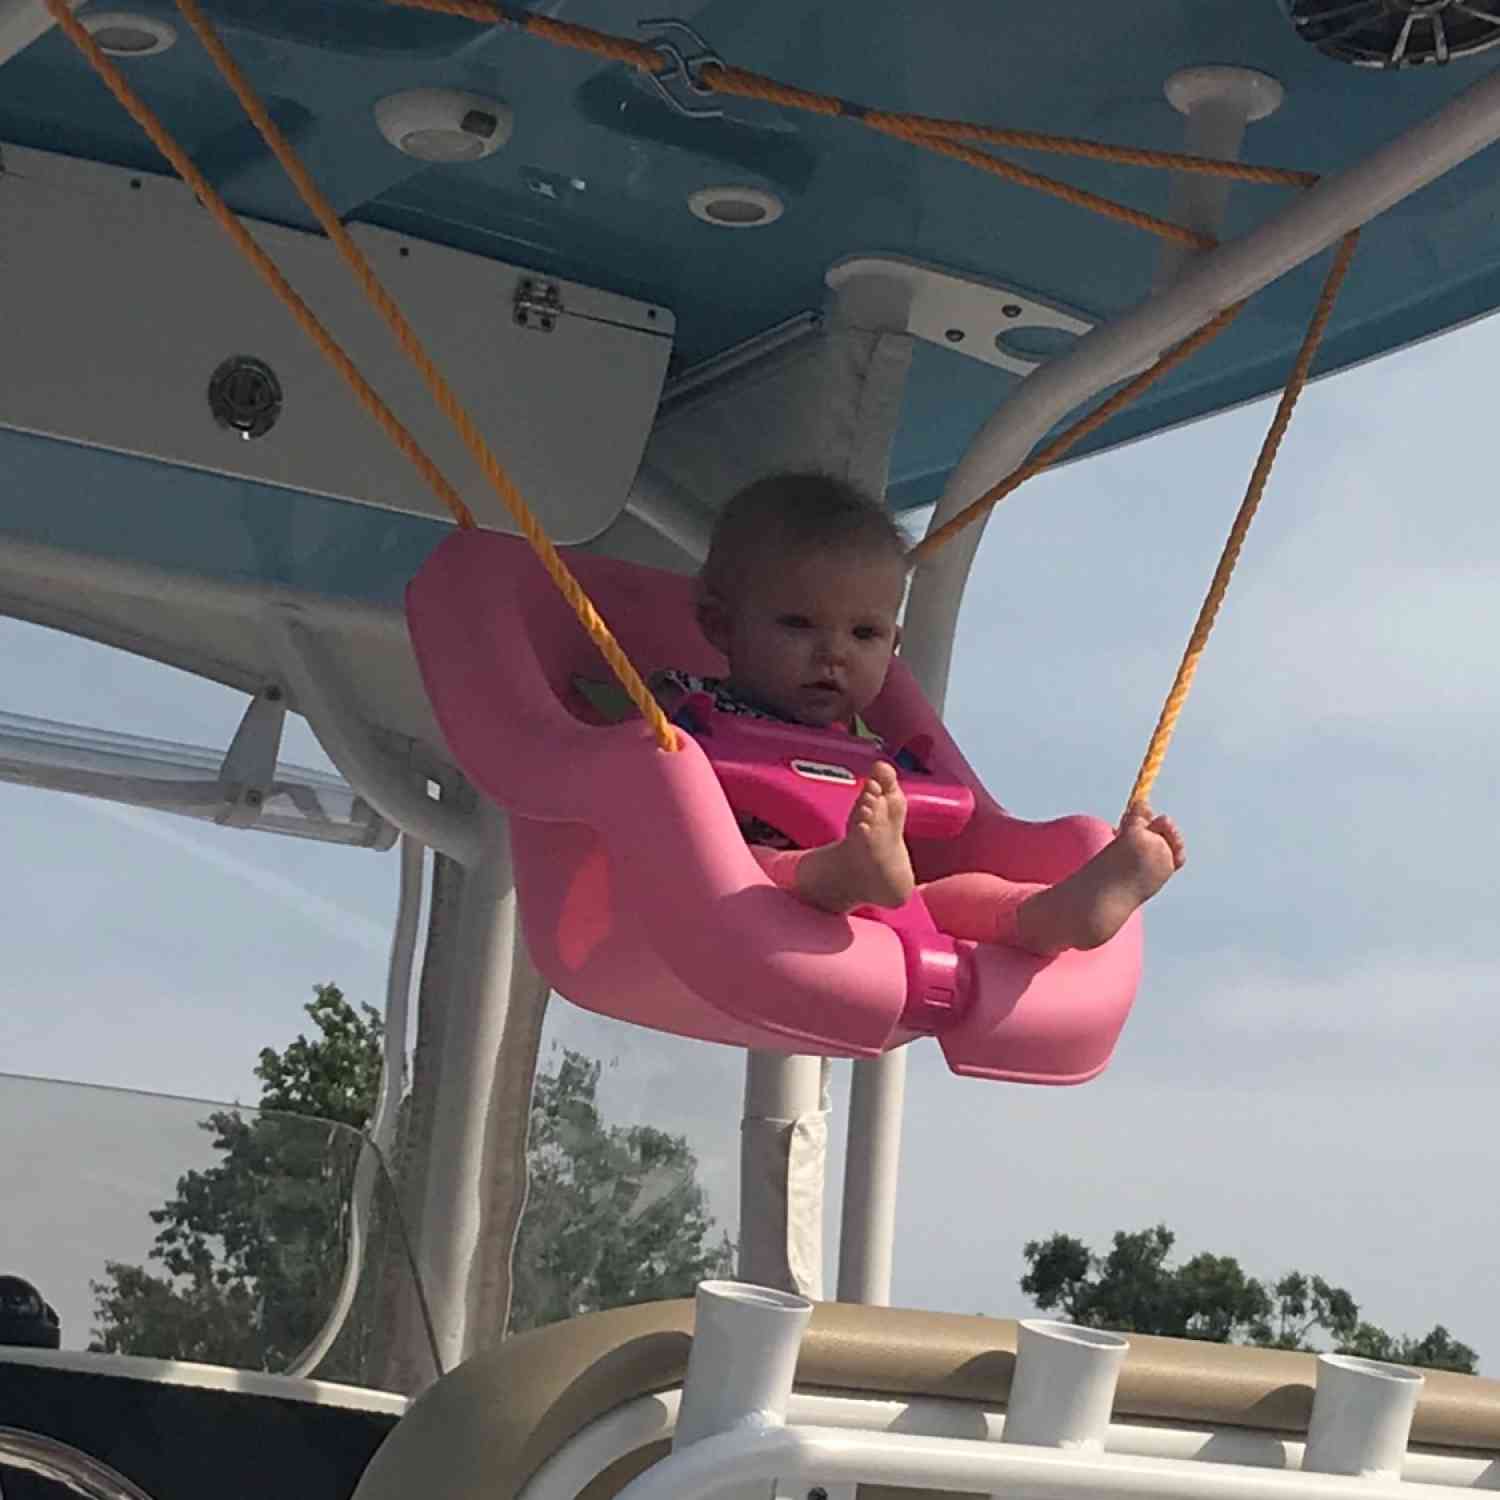 Grand baby enjoying the view from the t-too!